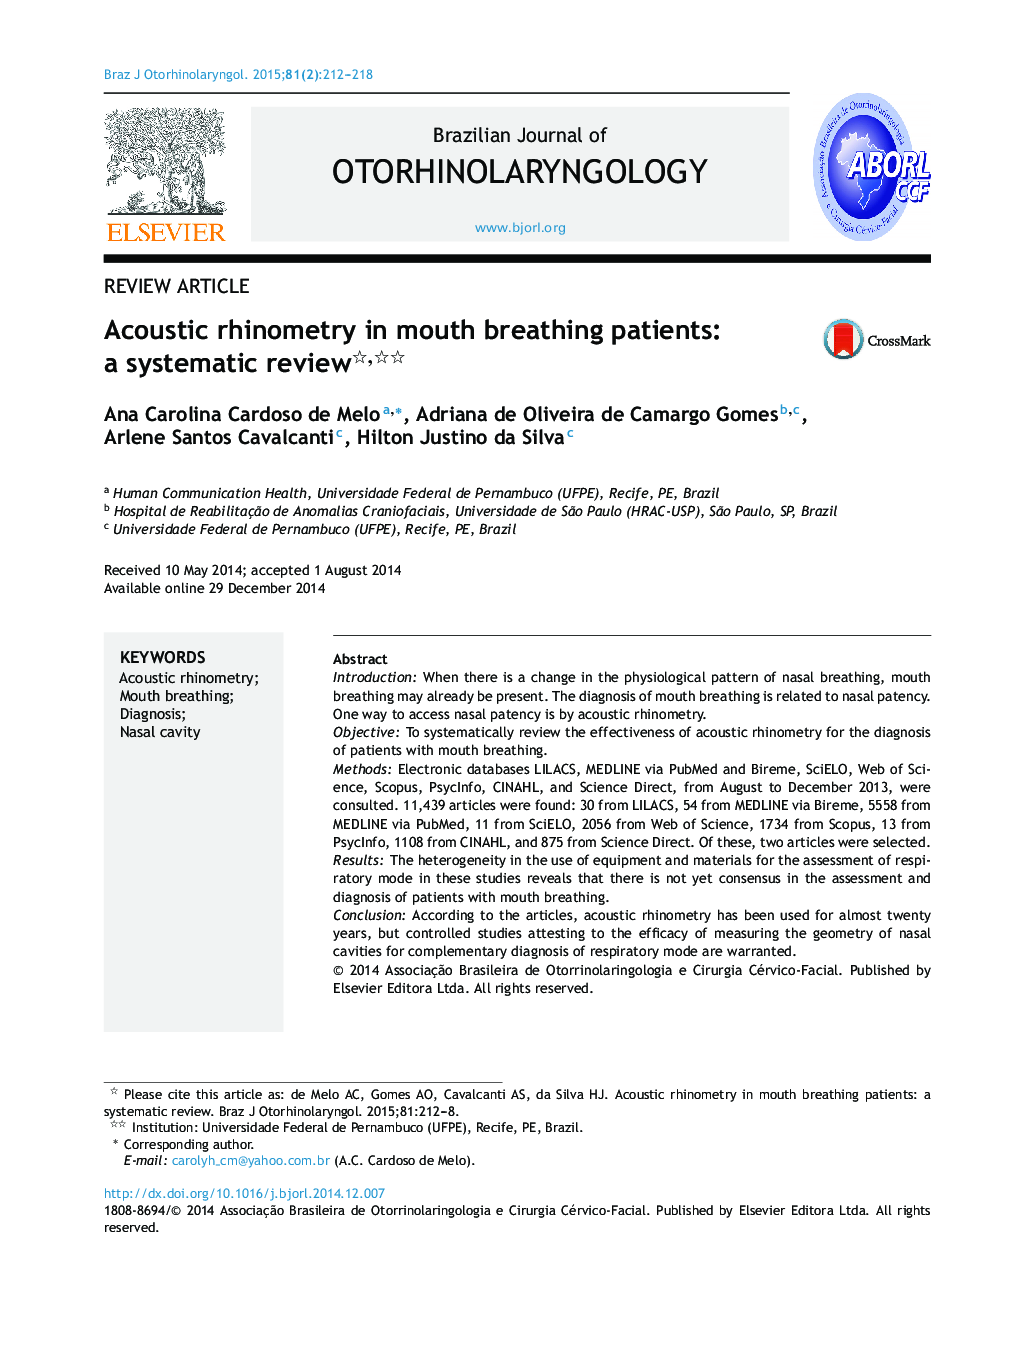 Acoustic rhinometry in mouth breathing patients: a systematic review 